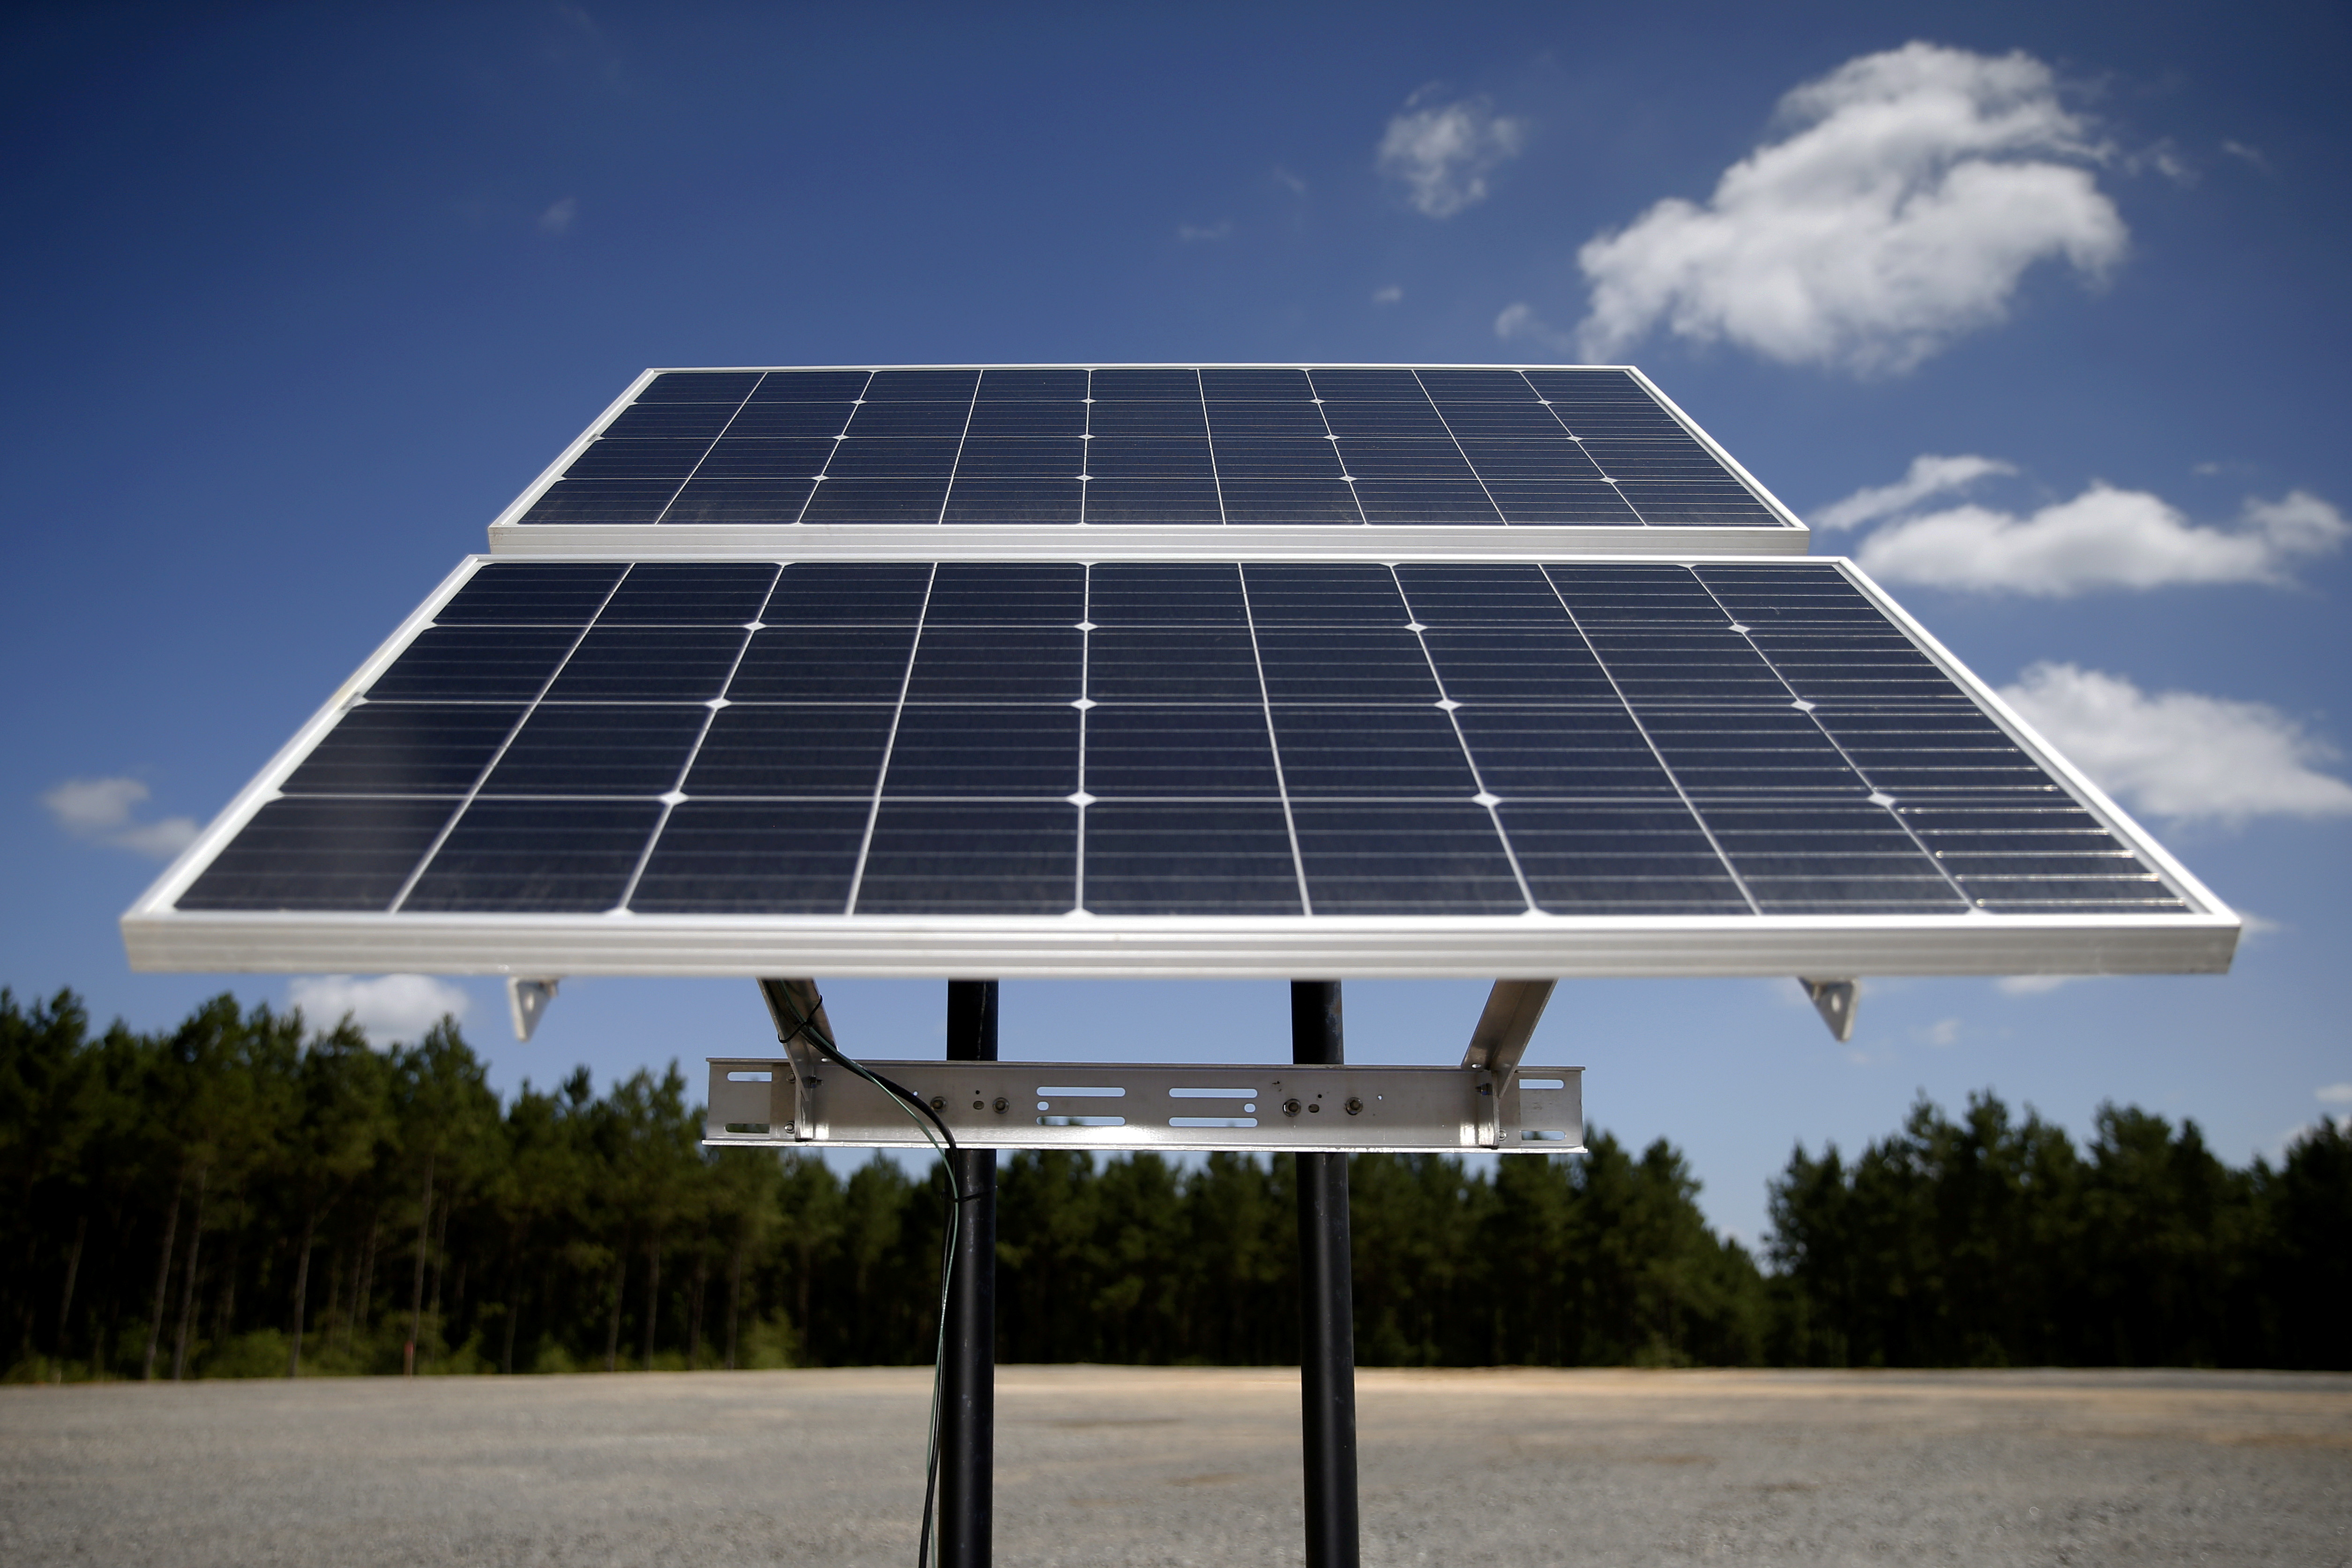 Solar panels are pictured at the BP America Gasosaurus Gas Unit well site in Lufkin